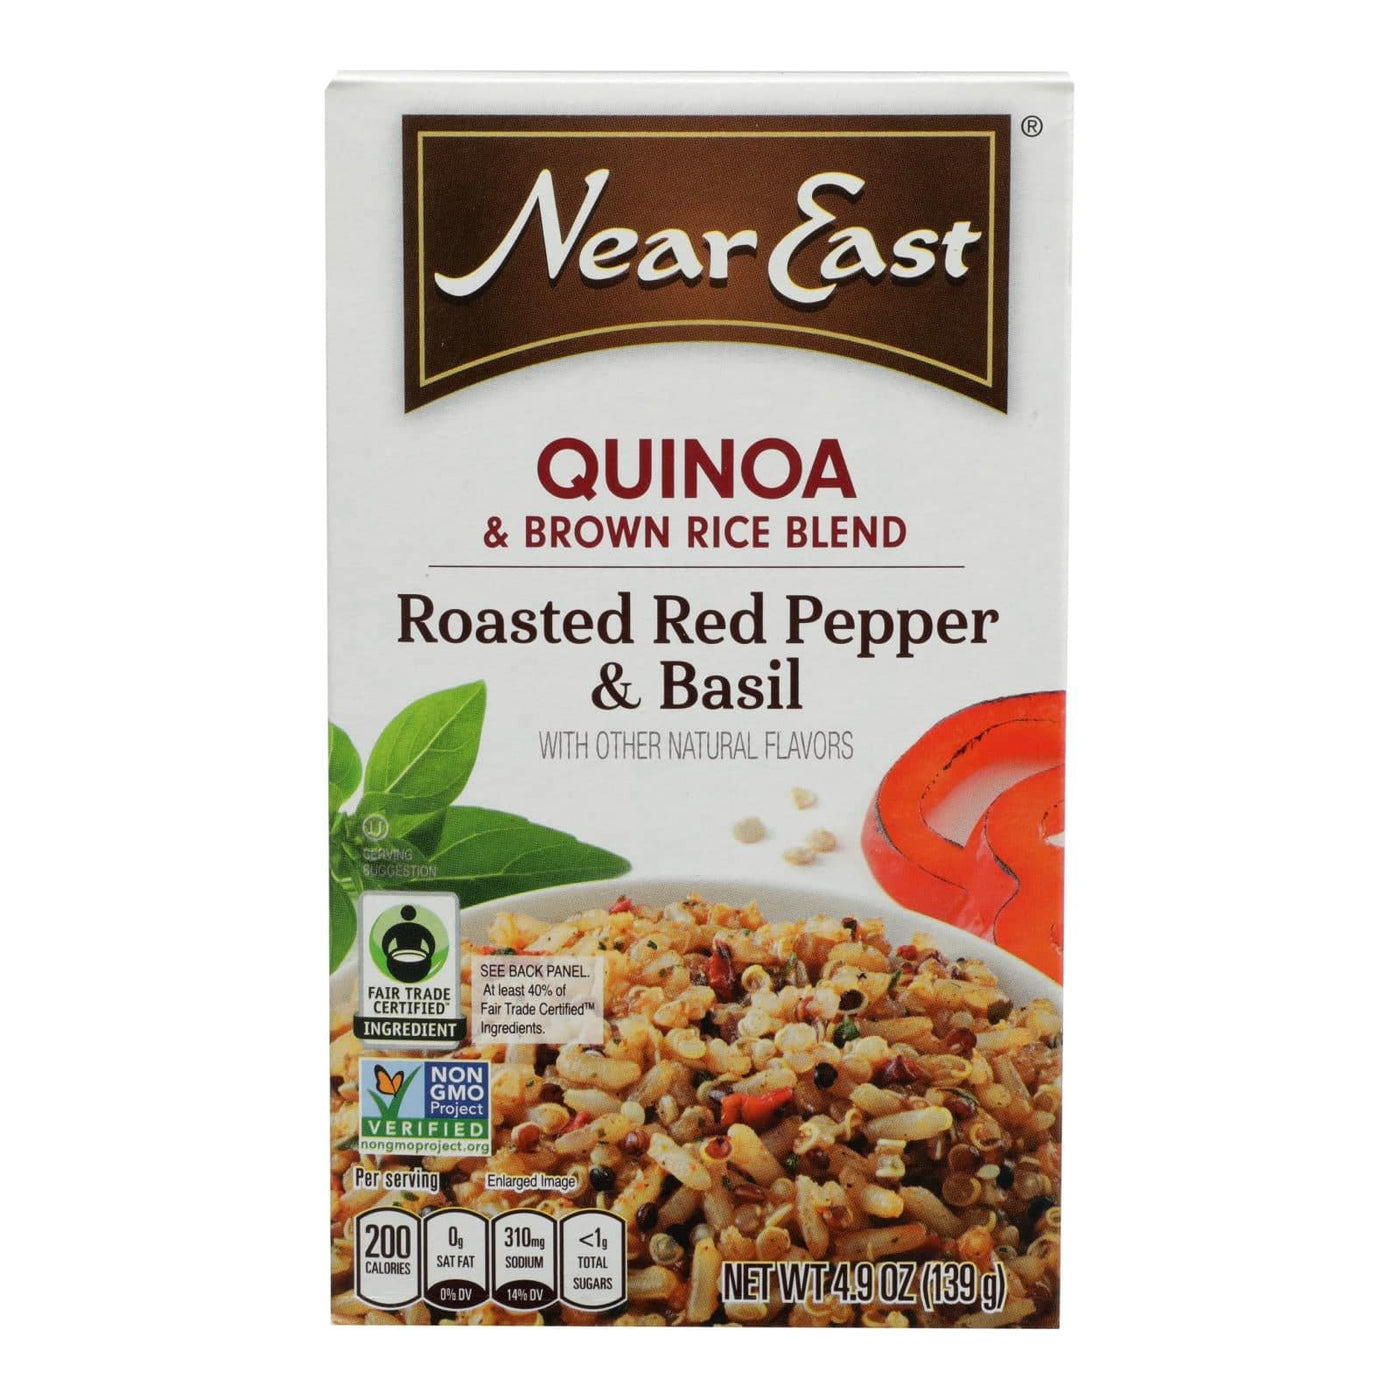 Buy Near East Quinoa Blend - Roasted Red Pepper And Basi - Case Of 12 - 4.9 Oz.  at OnlyNaturals.us